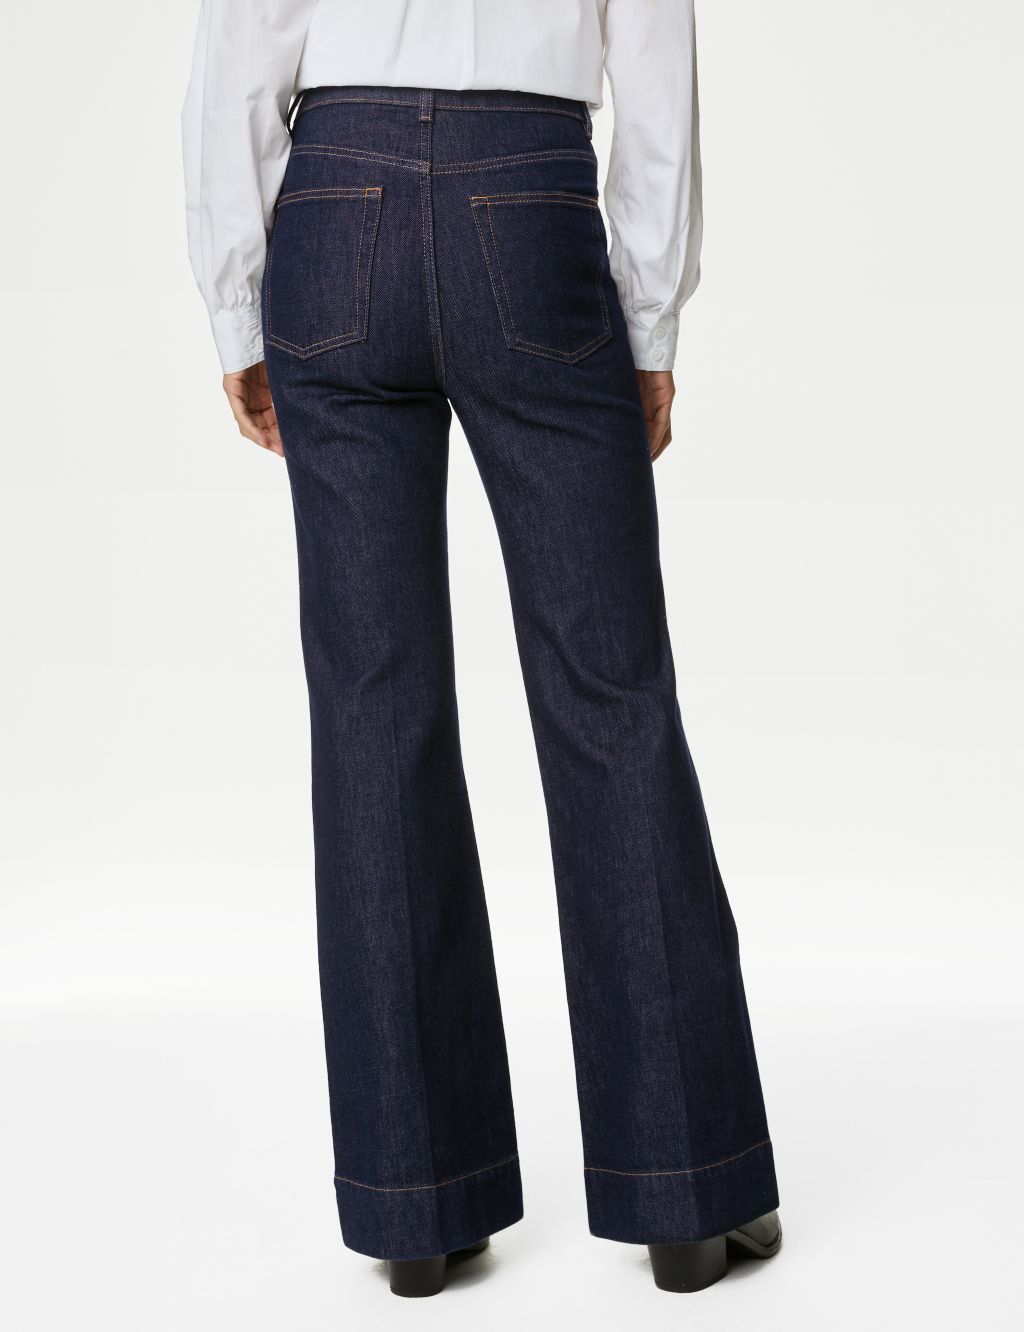 Patch Pocket Flare High Waisted Jeans image 4